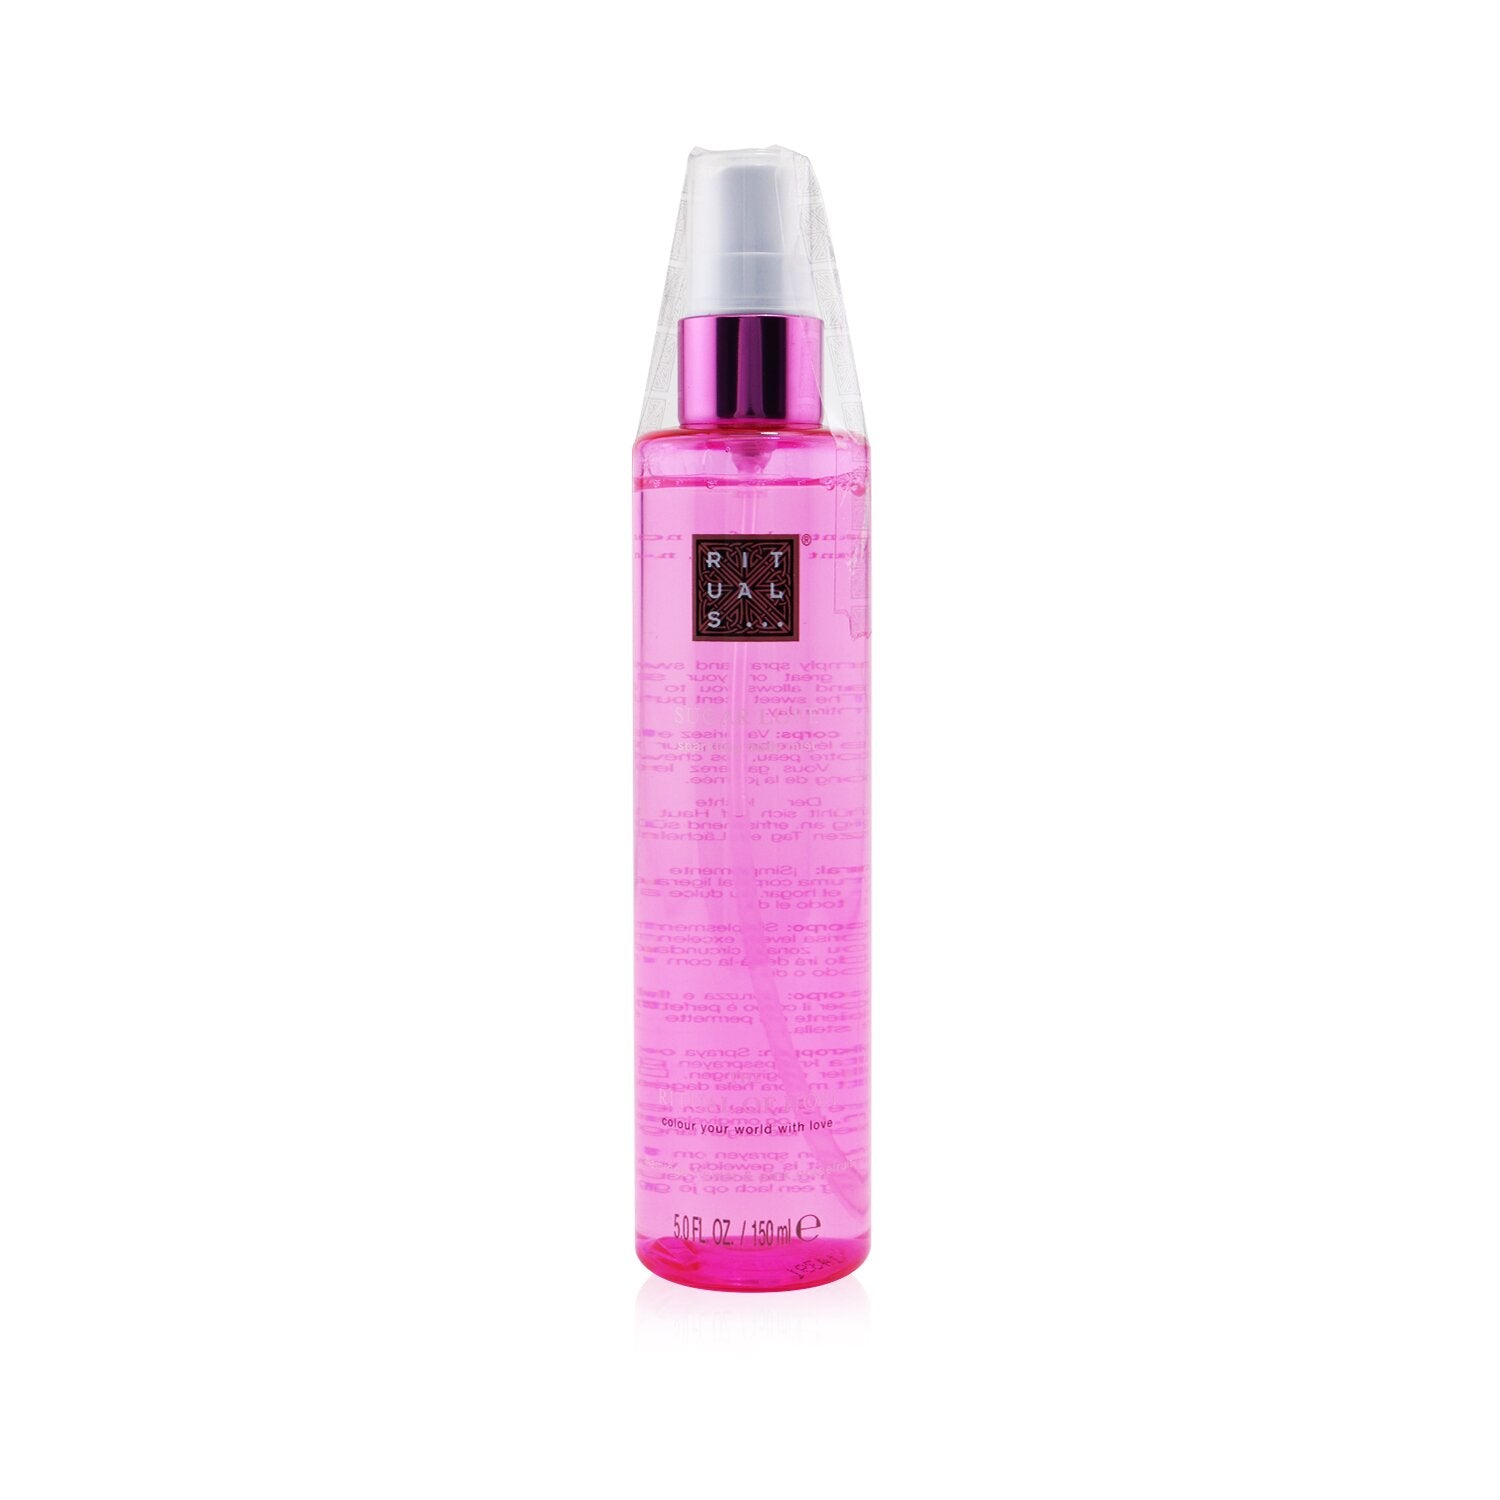 dreigen Wortel syndroom The Ritual Of Holi Sugar Love Sparkling Body Mist for Sale | Rituals,  Skincare, Buy Now – Author